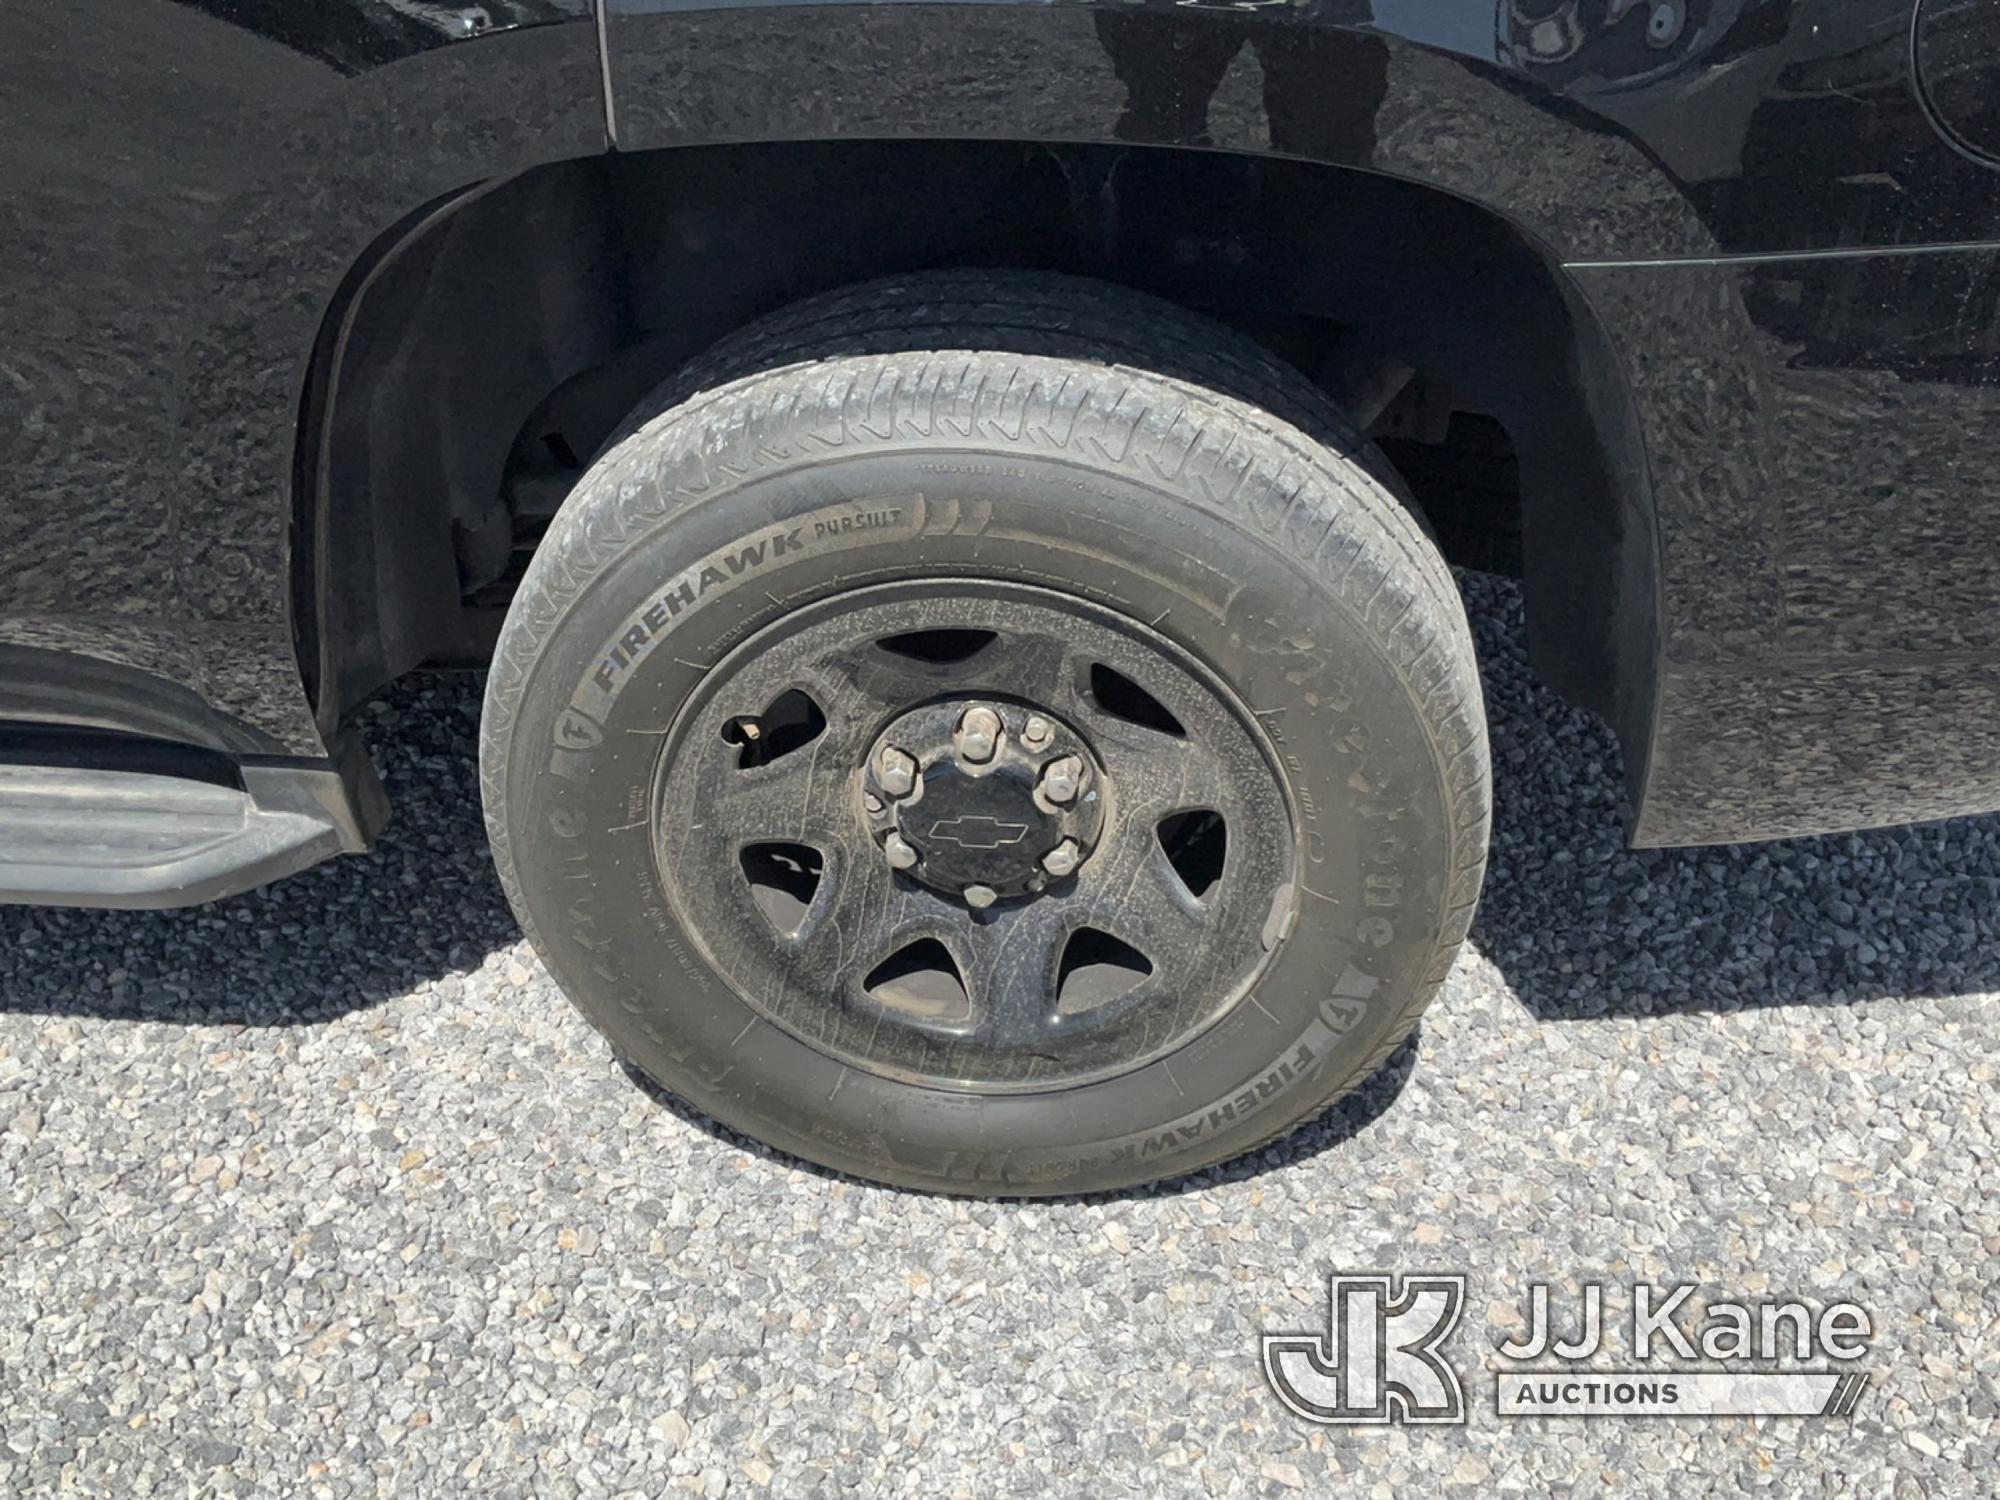 (Las Vegas, NV) 2016 Chevrolet Tahoe Police Package Towed In, No Console, Rear Seats Unbolted, Engin